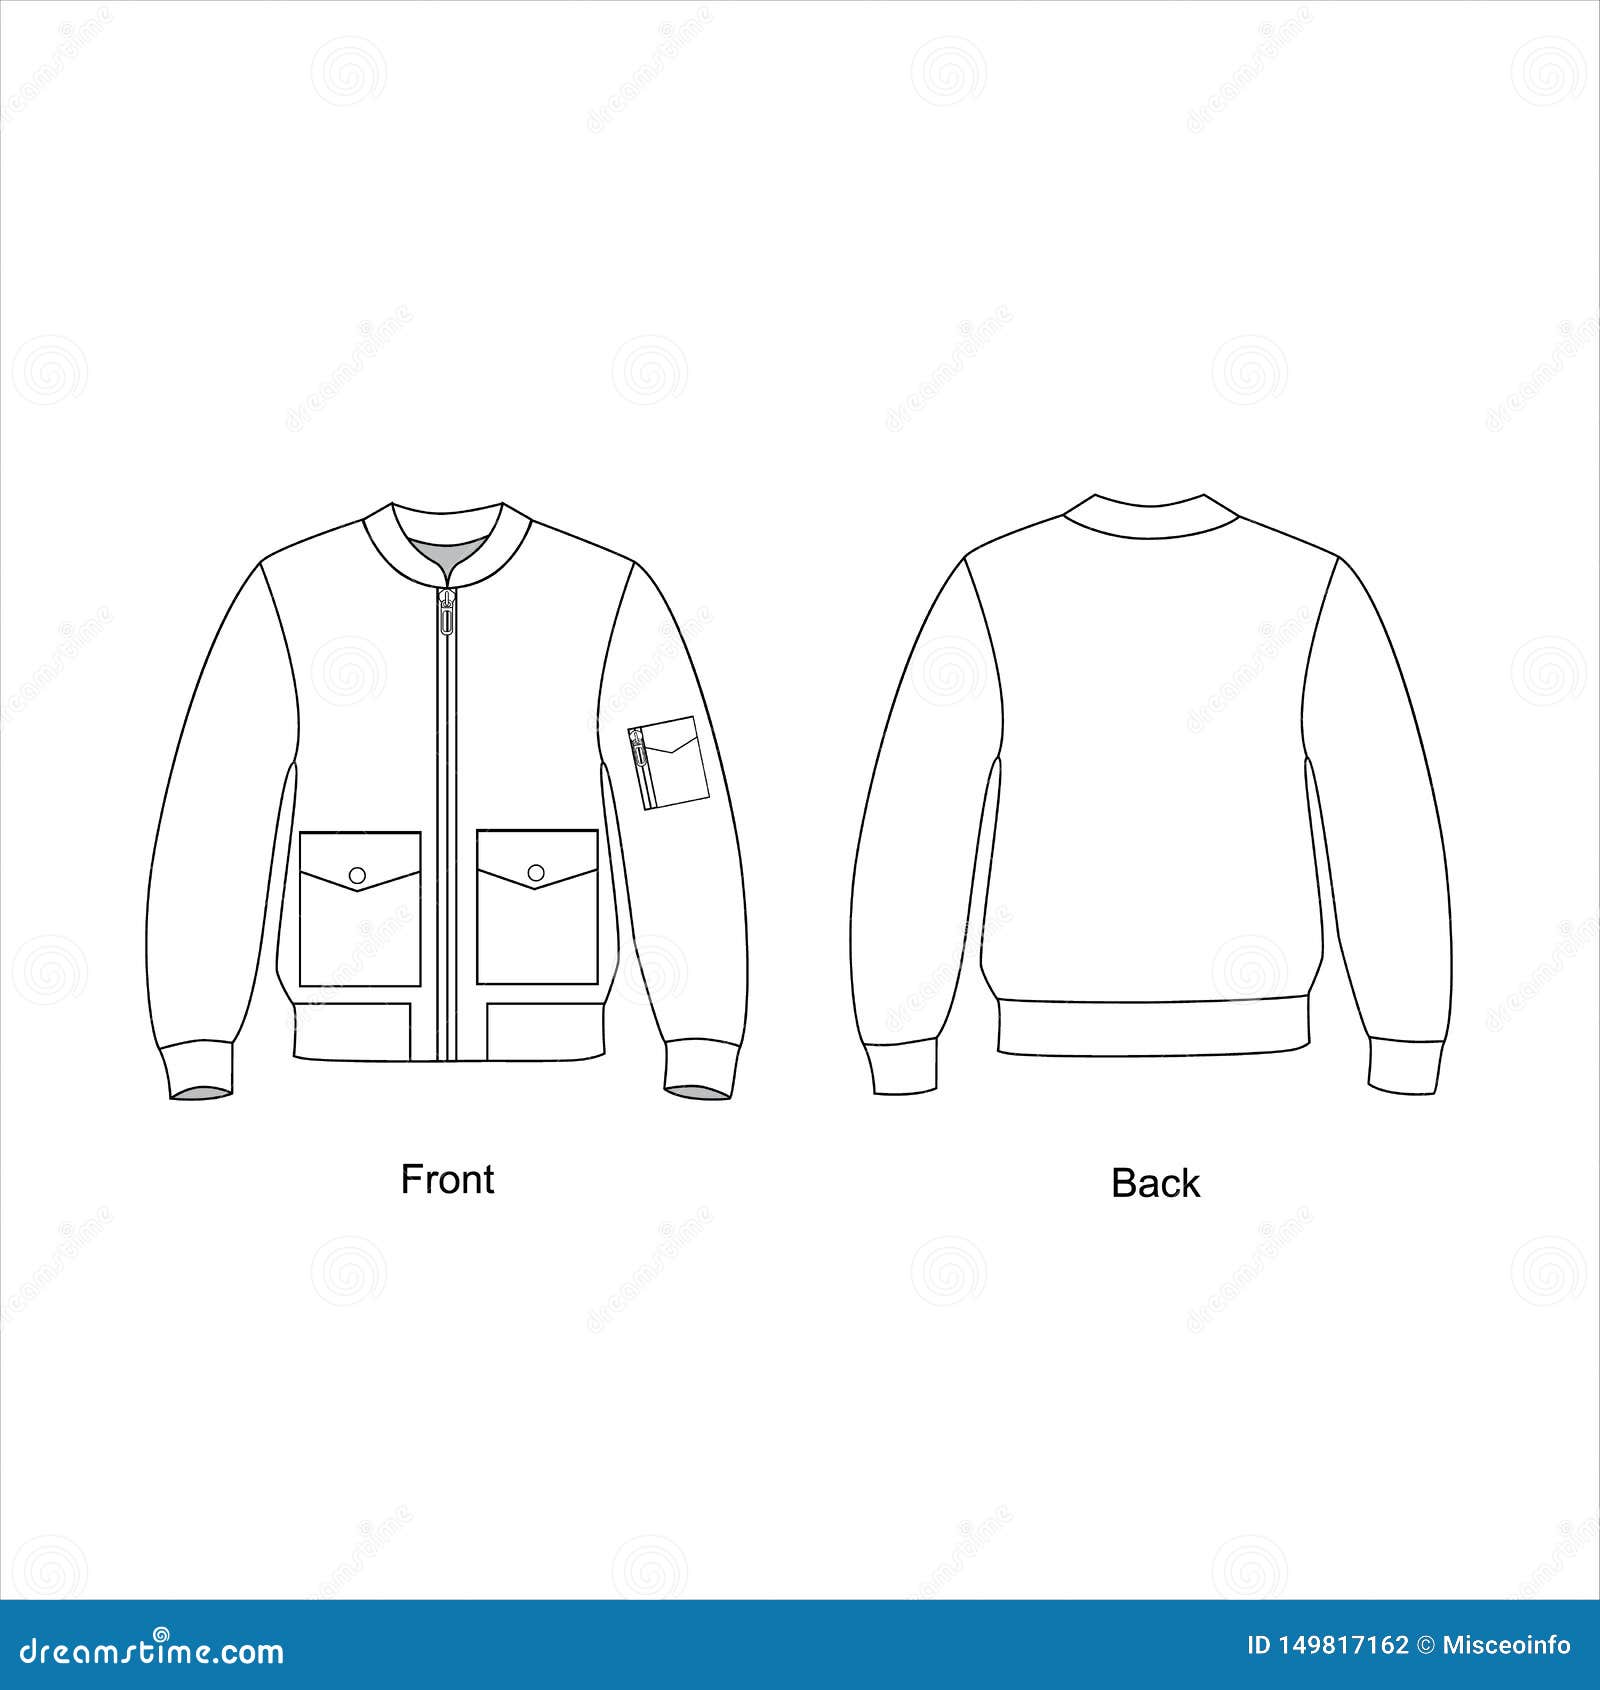 Fashion flats for mens wear A bomber jacket sketch and flats  Move from  a sketch to flats professional way with precision confidence and accuracy  A project from the How to Draw